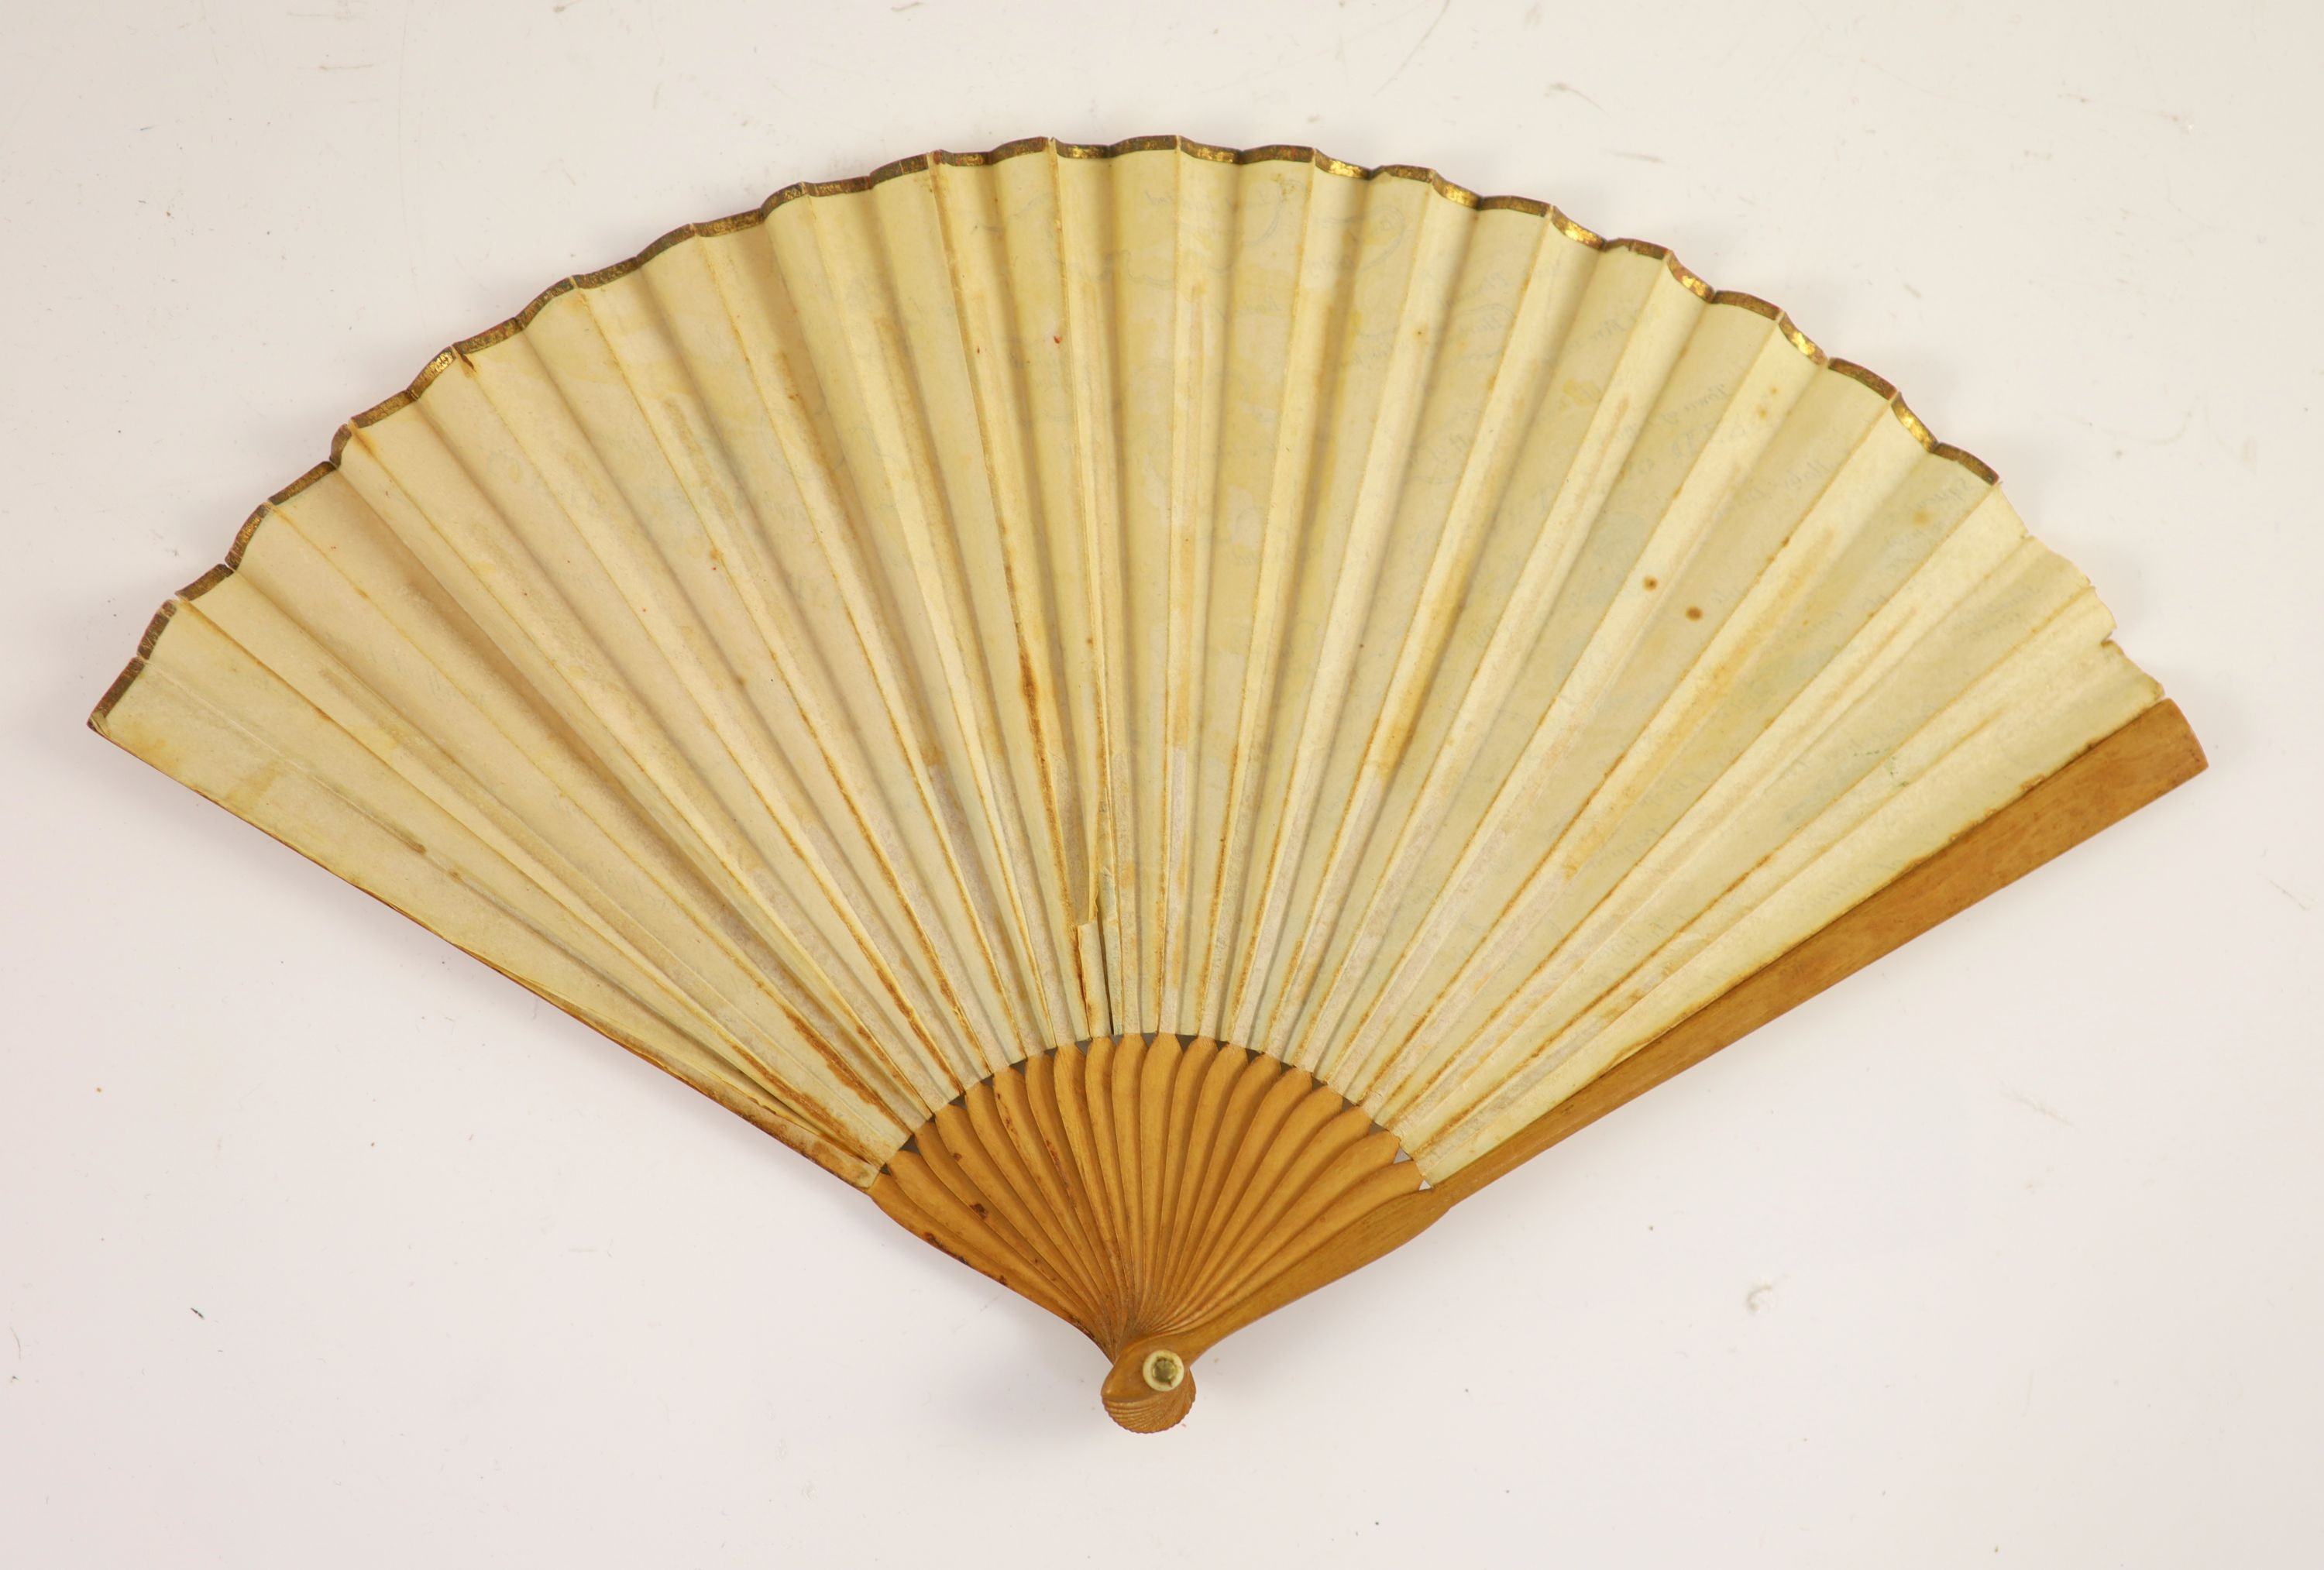 A rare 18th century 'Land of Matrimony' and ‘Land of Celibacy’ fan, 17.5cm long - Image 2 of 2